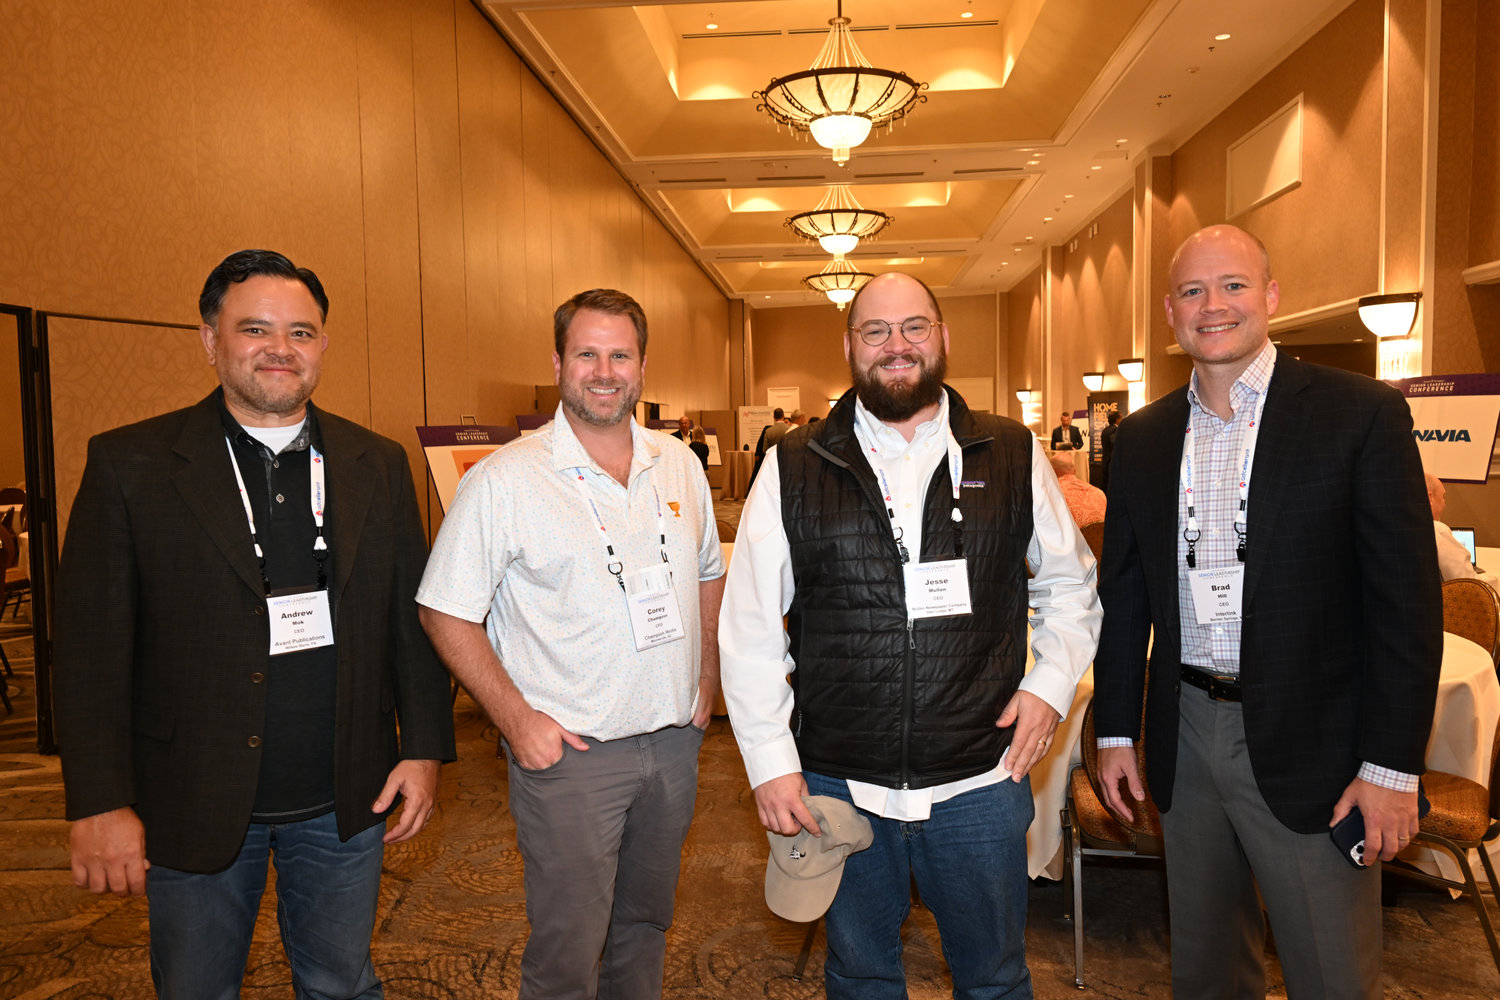 Andrew Mok, CEO of Avant Publications; Corey Champion, CFO of Champion Media; Jesse Mullen, CEO of Mullen Newspaper Company; and Brad Hill, CEO of Interlink. (Photo by Jeff Strout)